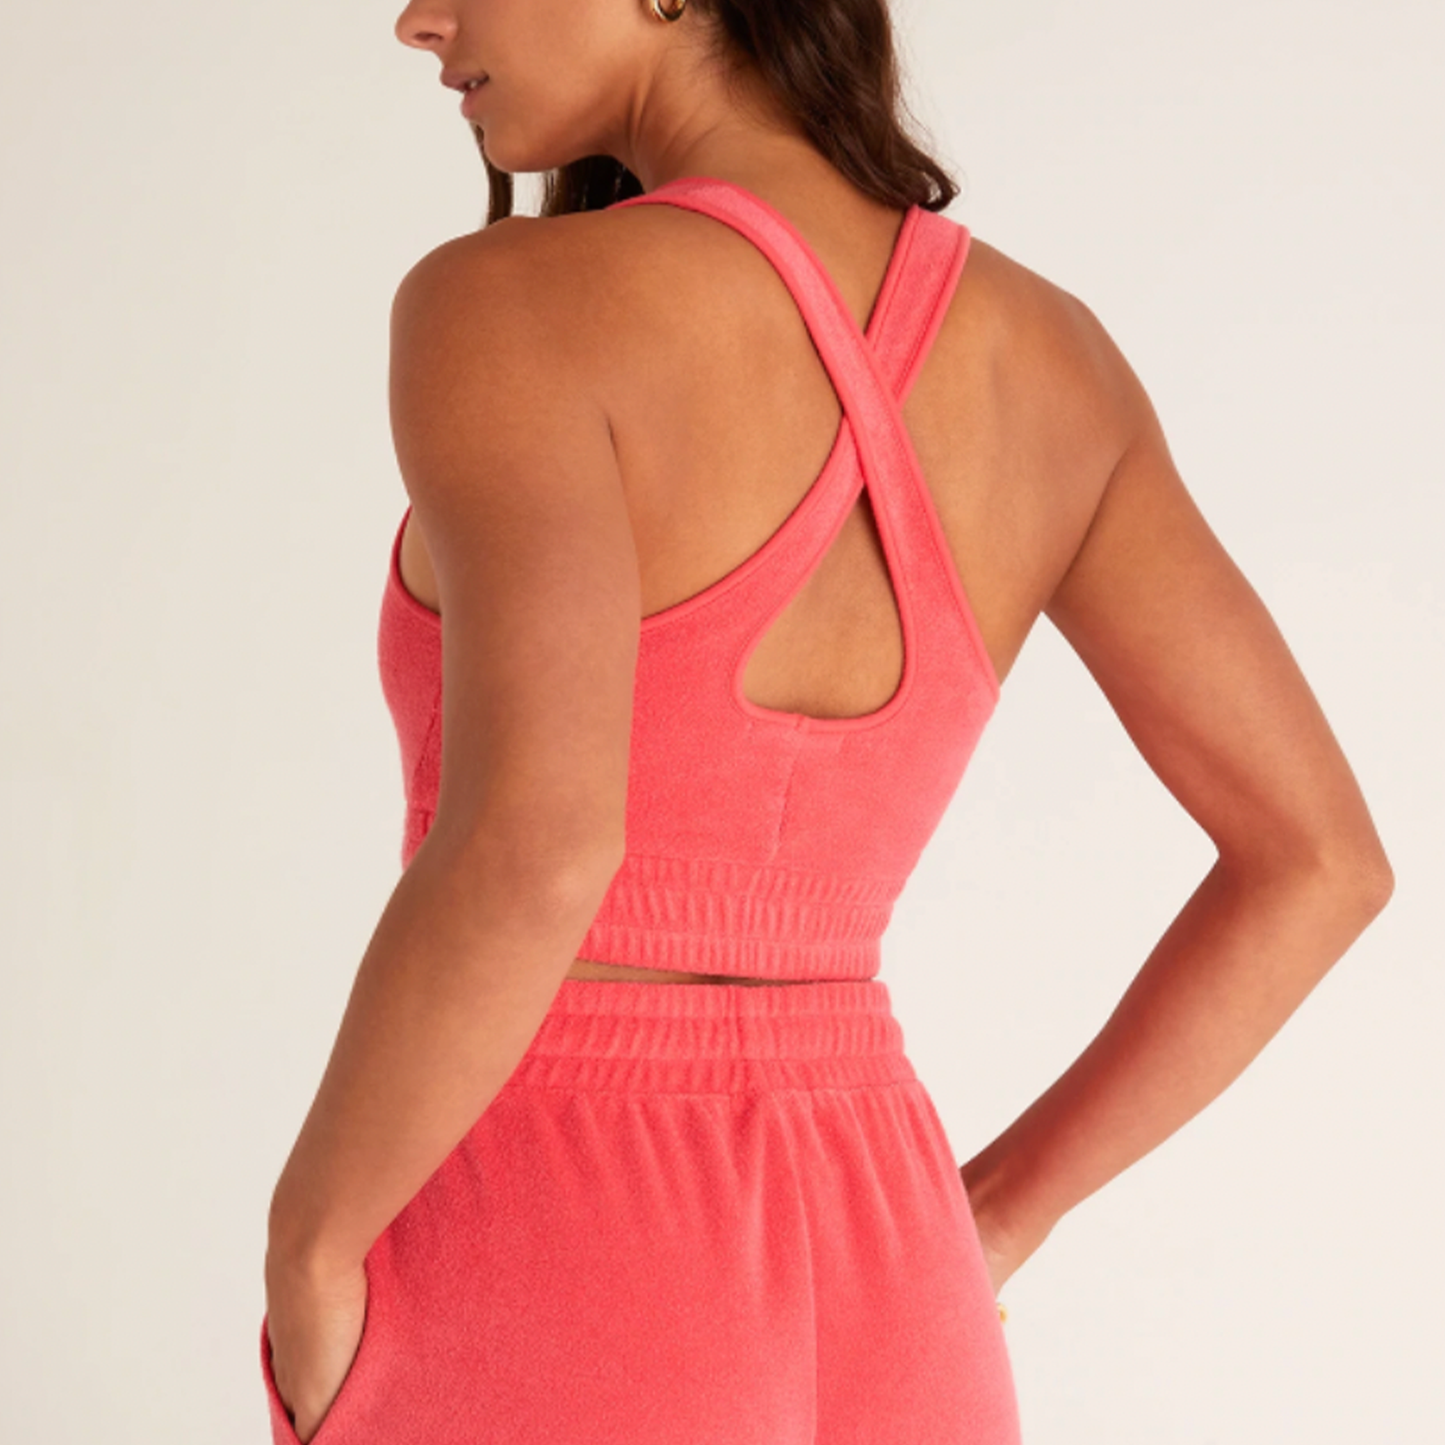 Z Supply Sunny Loop Terry Tank Bra. A tank bra with a thicker terry feel, thicker elastic band for moderate support and jersey lining. You'll reach for this bralette whether you're going to the gym or running errands